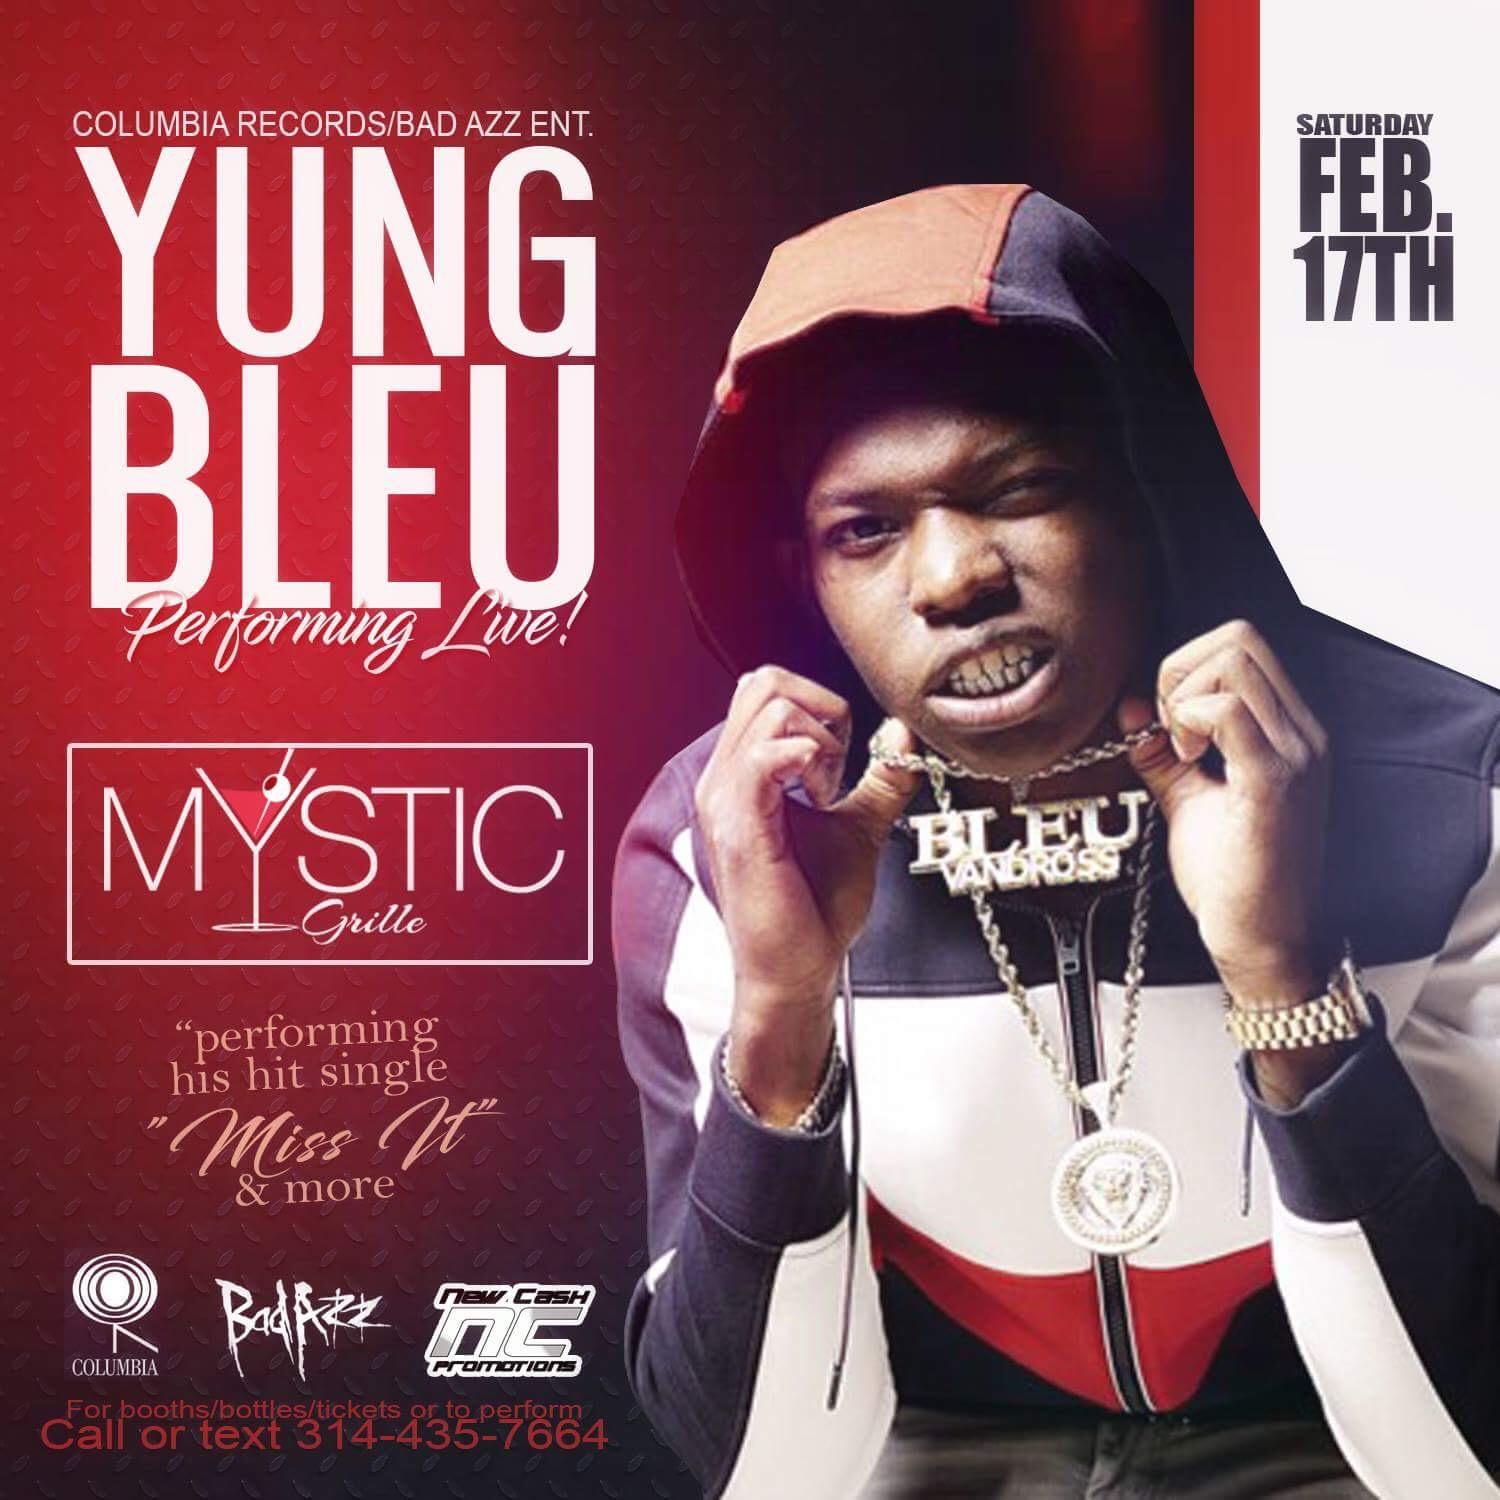 YUNG BLEU LIVE IN CONCERT ST. LOUIS GENERAL ADMISSION TICKETS